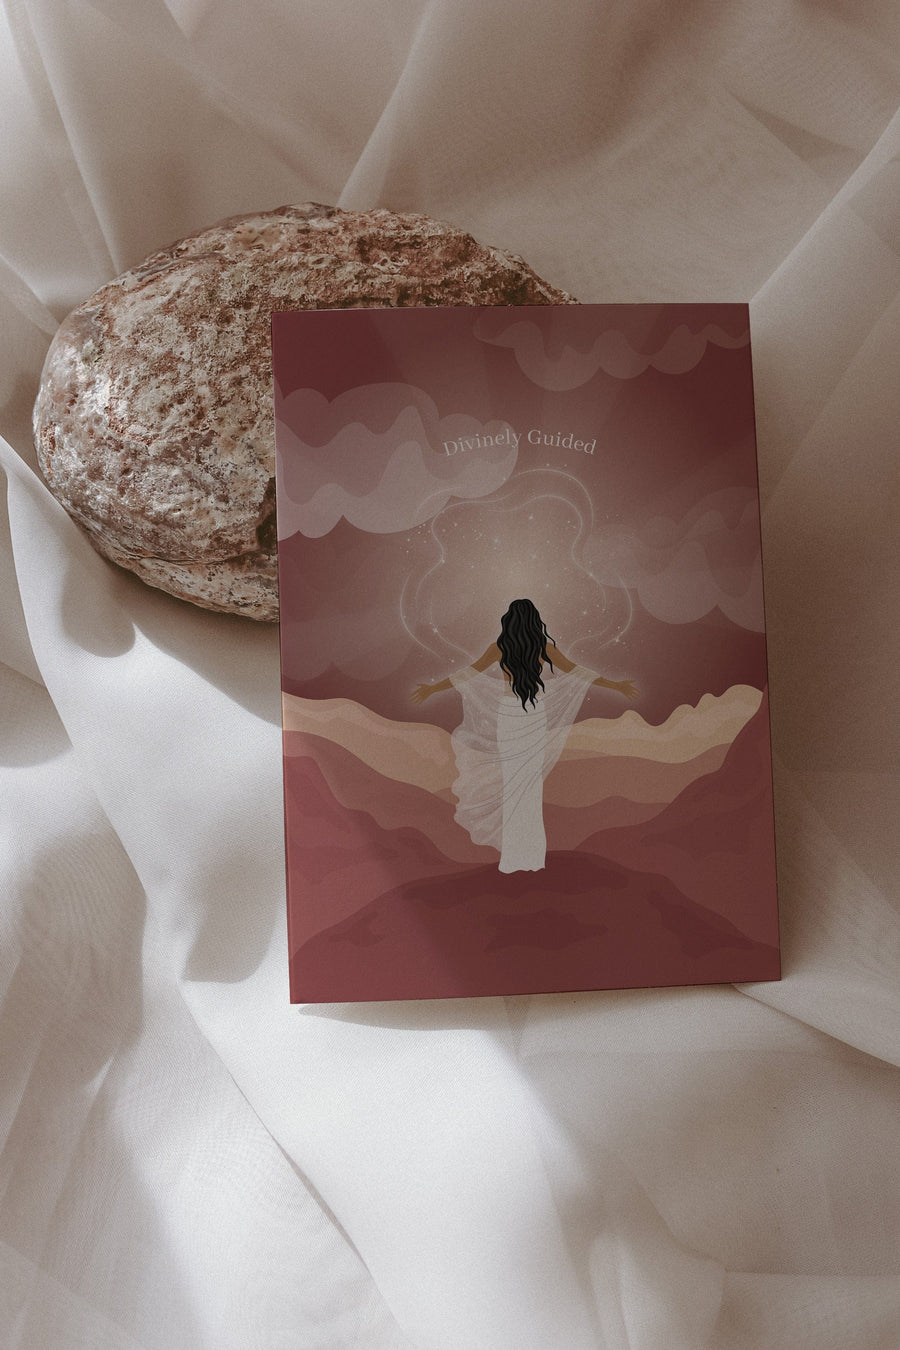 Divinely Guided Postcard